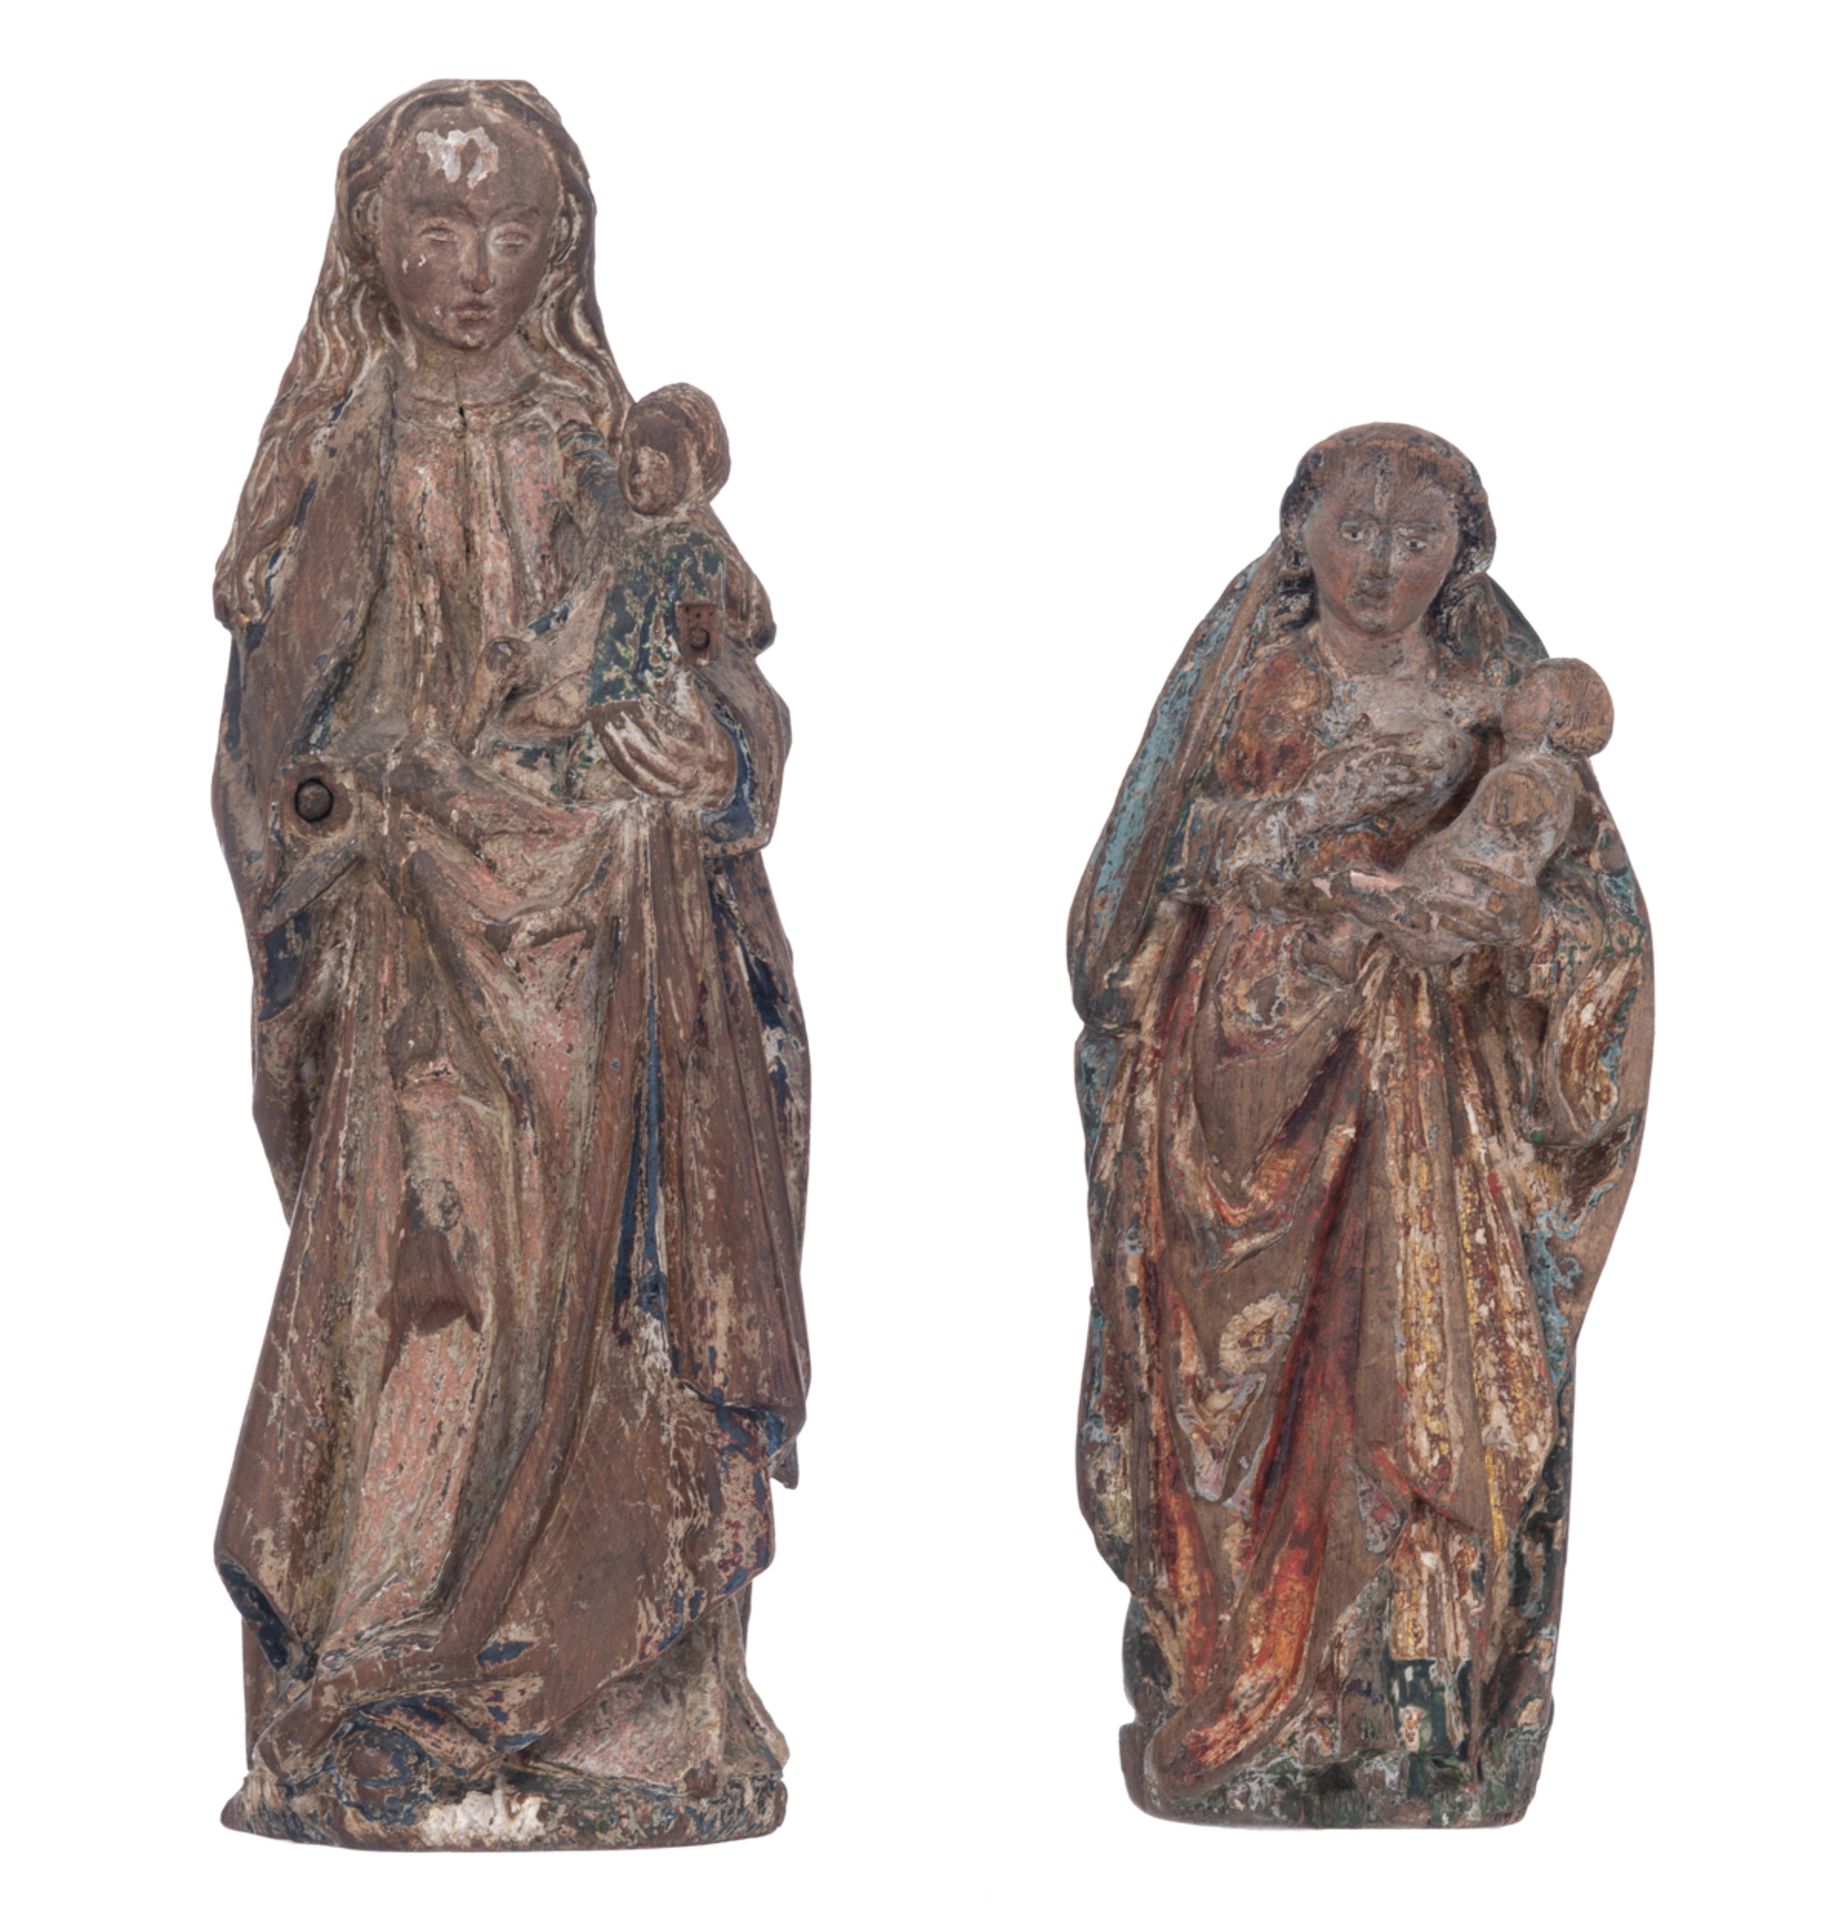 A 16th/17thC oak sculpture with traces of polychrome paint representing the Nursing Madonna, Souther